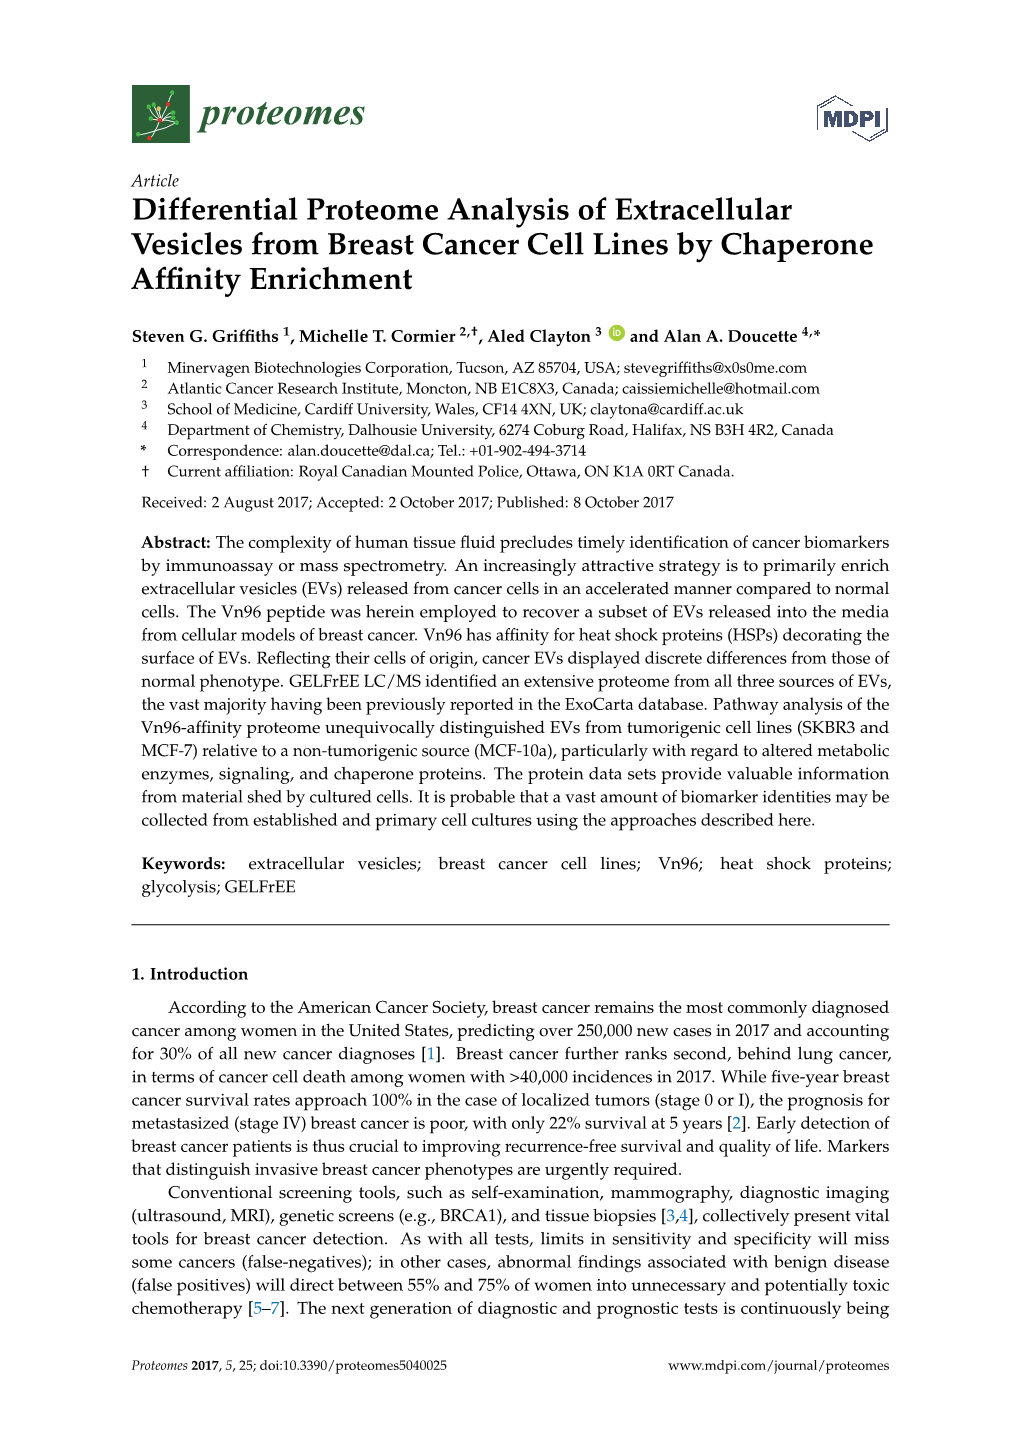 Differential Proteome Analysis of Extracellular Vesicles from Breast Cancer Cell Lines by Chaperone Afﬁnity Enrichment